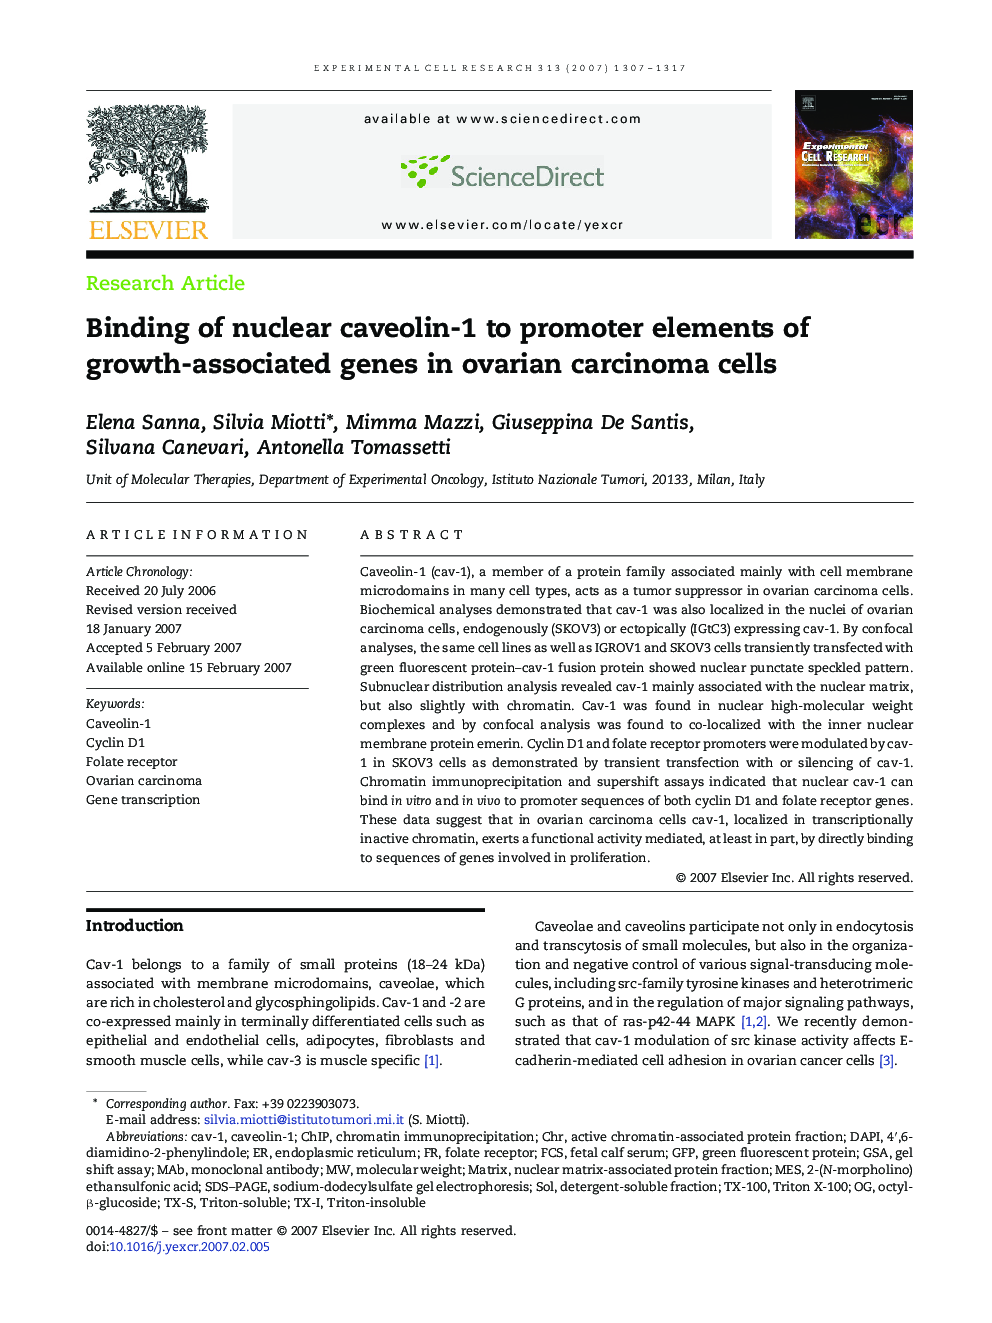 Binding of nuclear caveolin-1 to promoter elements of growth-associated genes in ovarian carcinoma cells